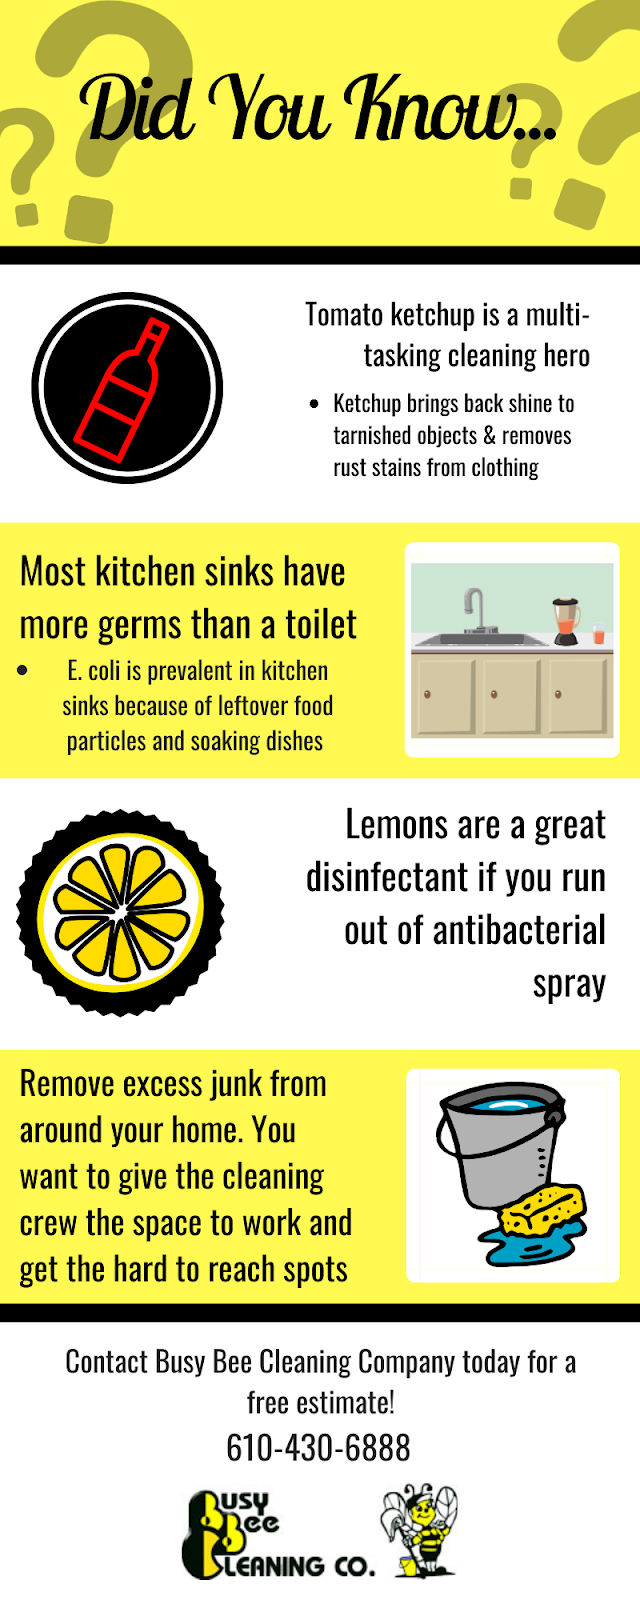 Infograhic explaining some little-known cleaning tips